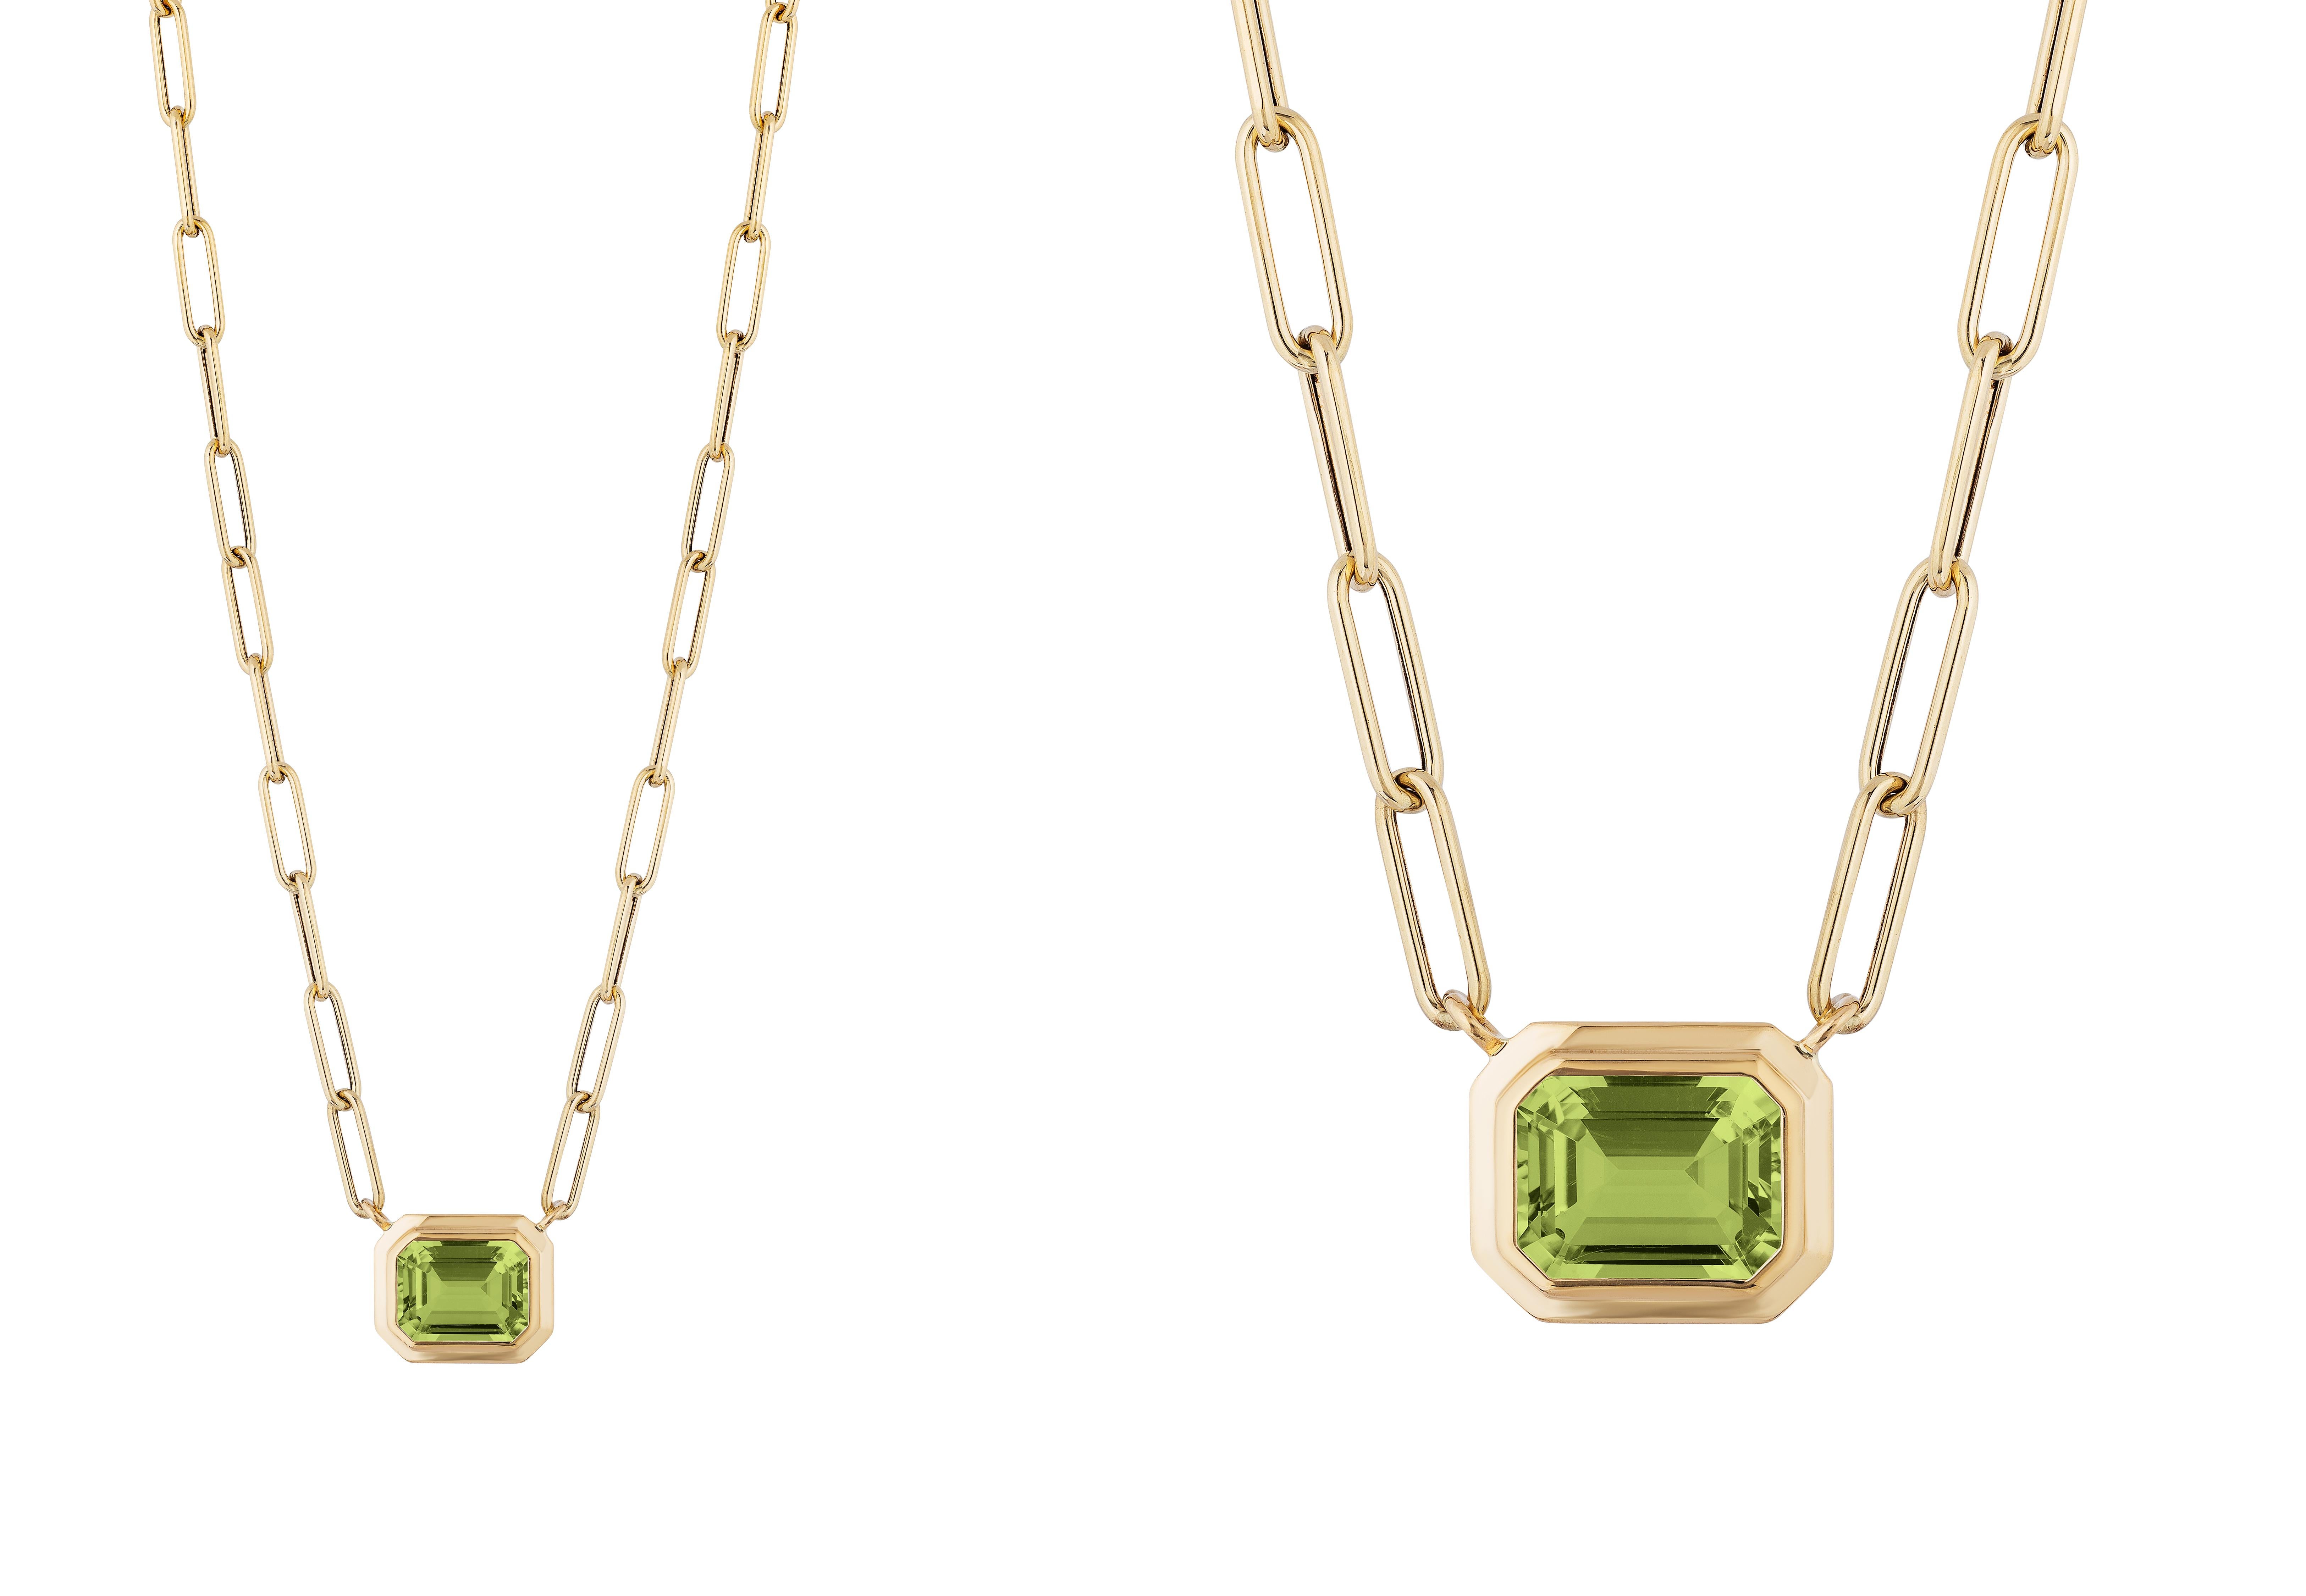 This beautiful East-West Peridot Emerald Cut Bezel Set Pendant in 18K Yellow Gold is from our ‘Manhattan’ Collection. Minimalist lines yet bold structures are what our Manhattan Collection is all about. Our pieces represent the famous skyline and